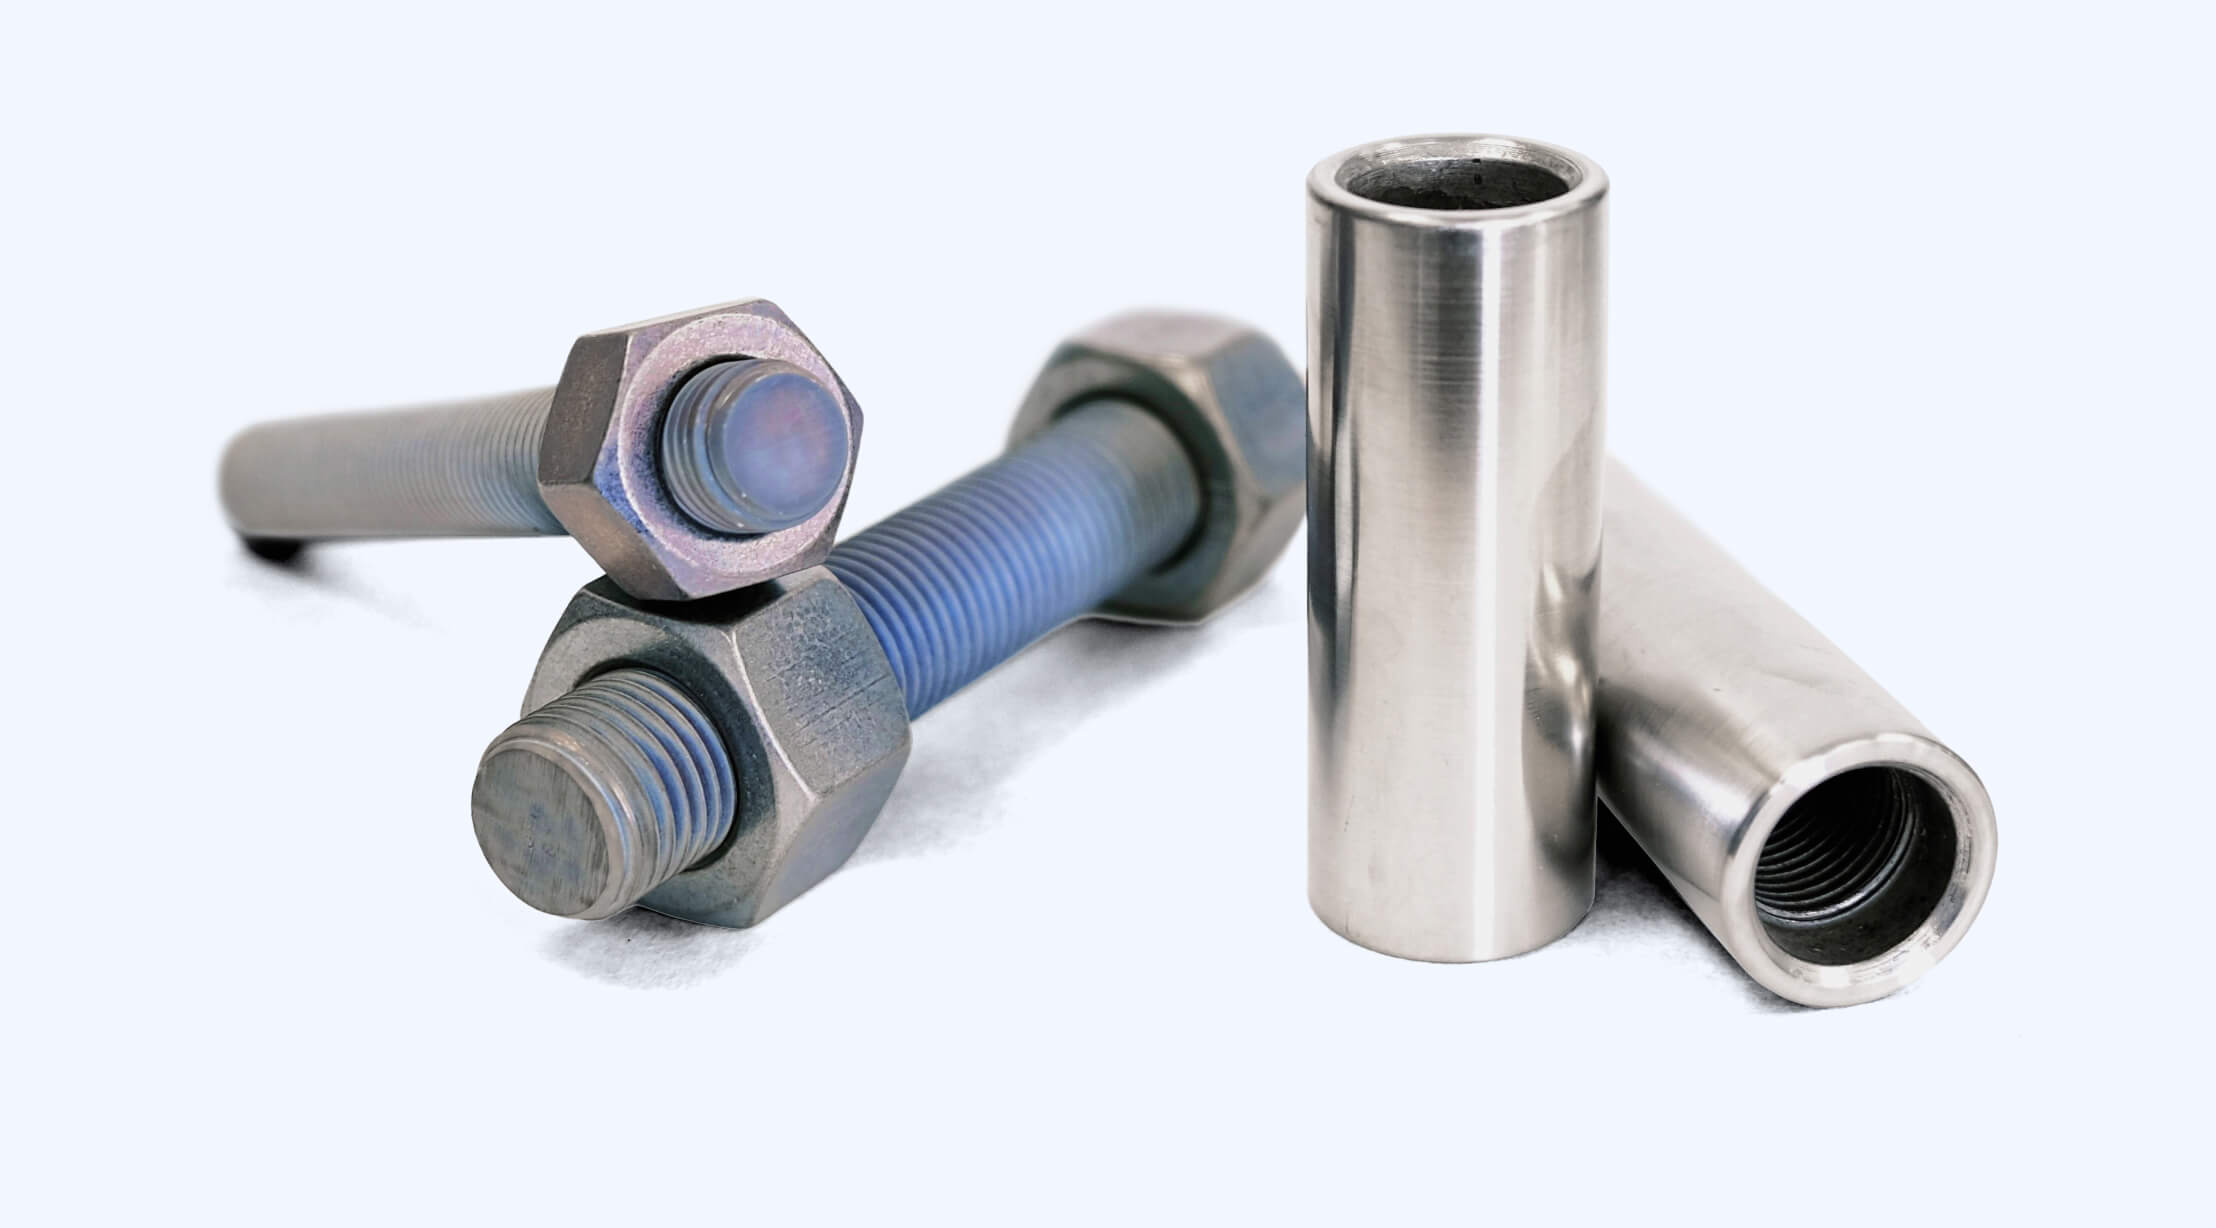 Nanolaminated bolts, nuts, and couplers